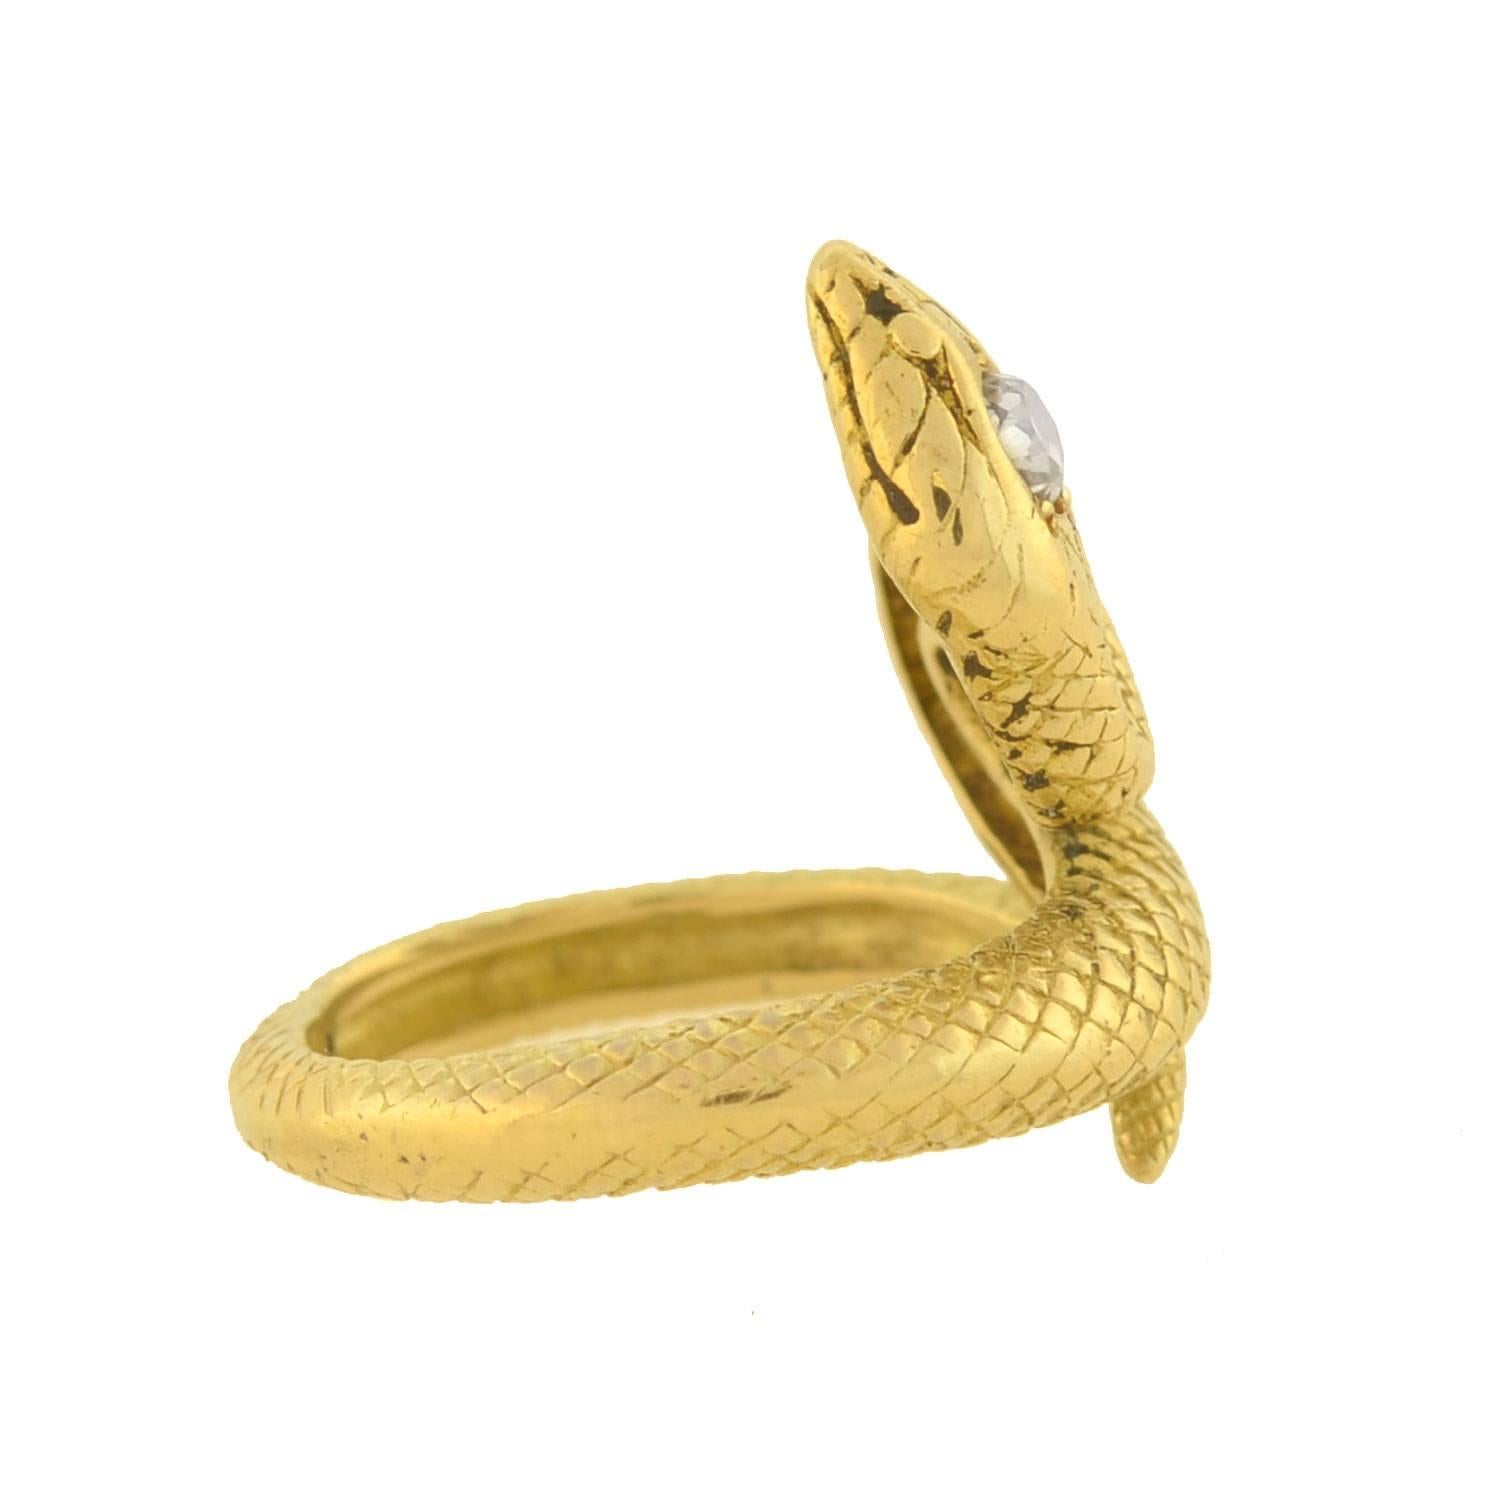 The snake has been a powerful image since the Victorian era and continues to be popular even in modern jewelry. It has been an inspiration for jewelry design for ages, often used to symbolize eternity, everlasting love, life and protection.

A very